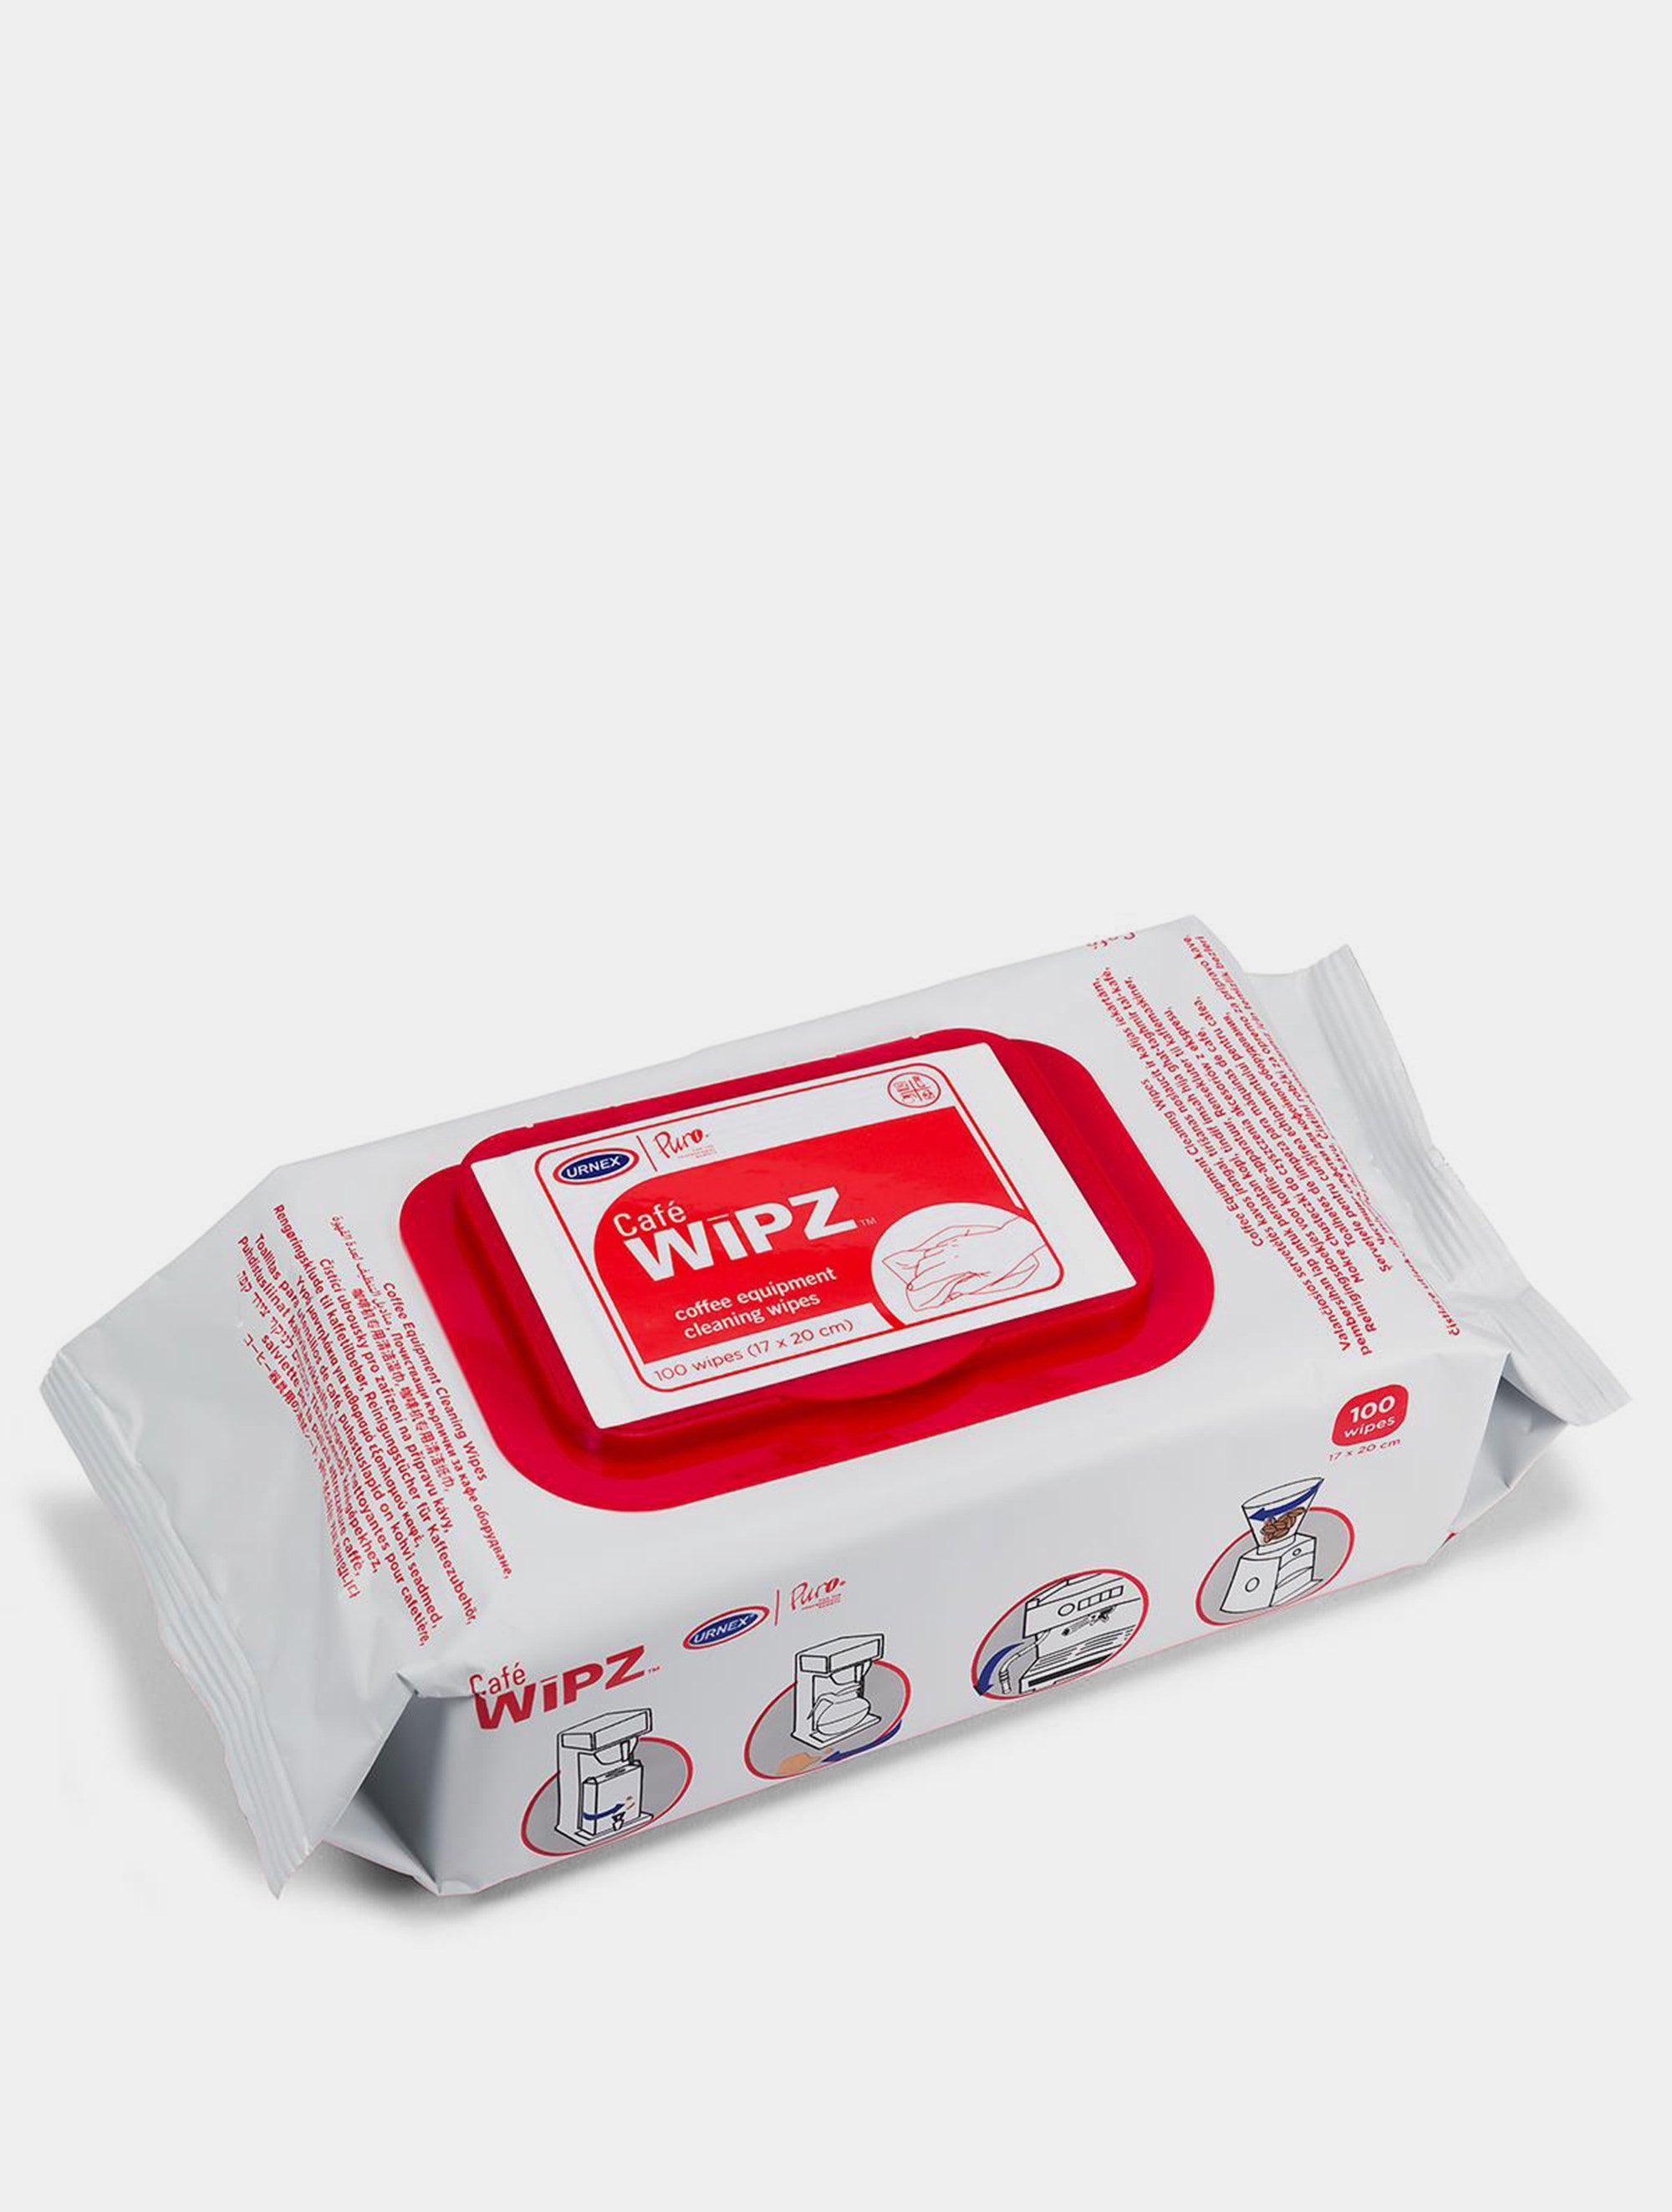 WIPZ Coffee Equipment Cleaning Wipes